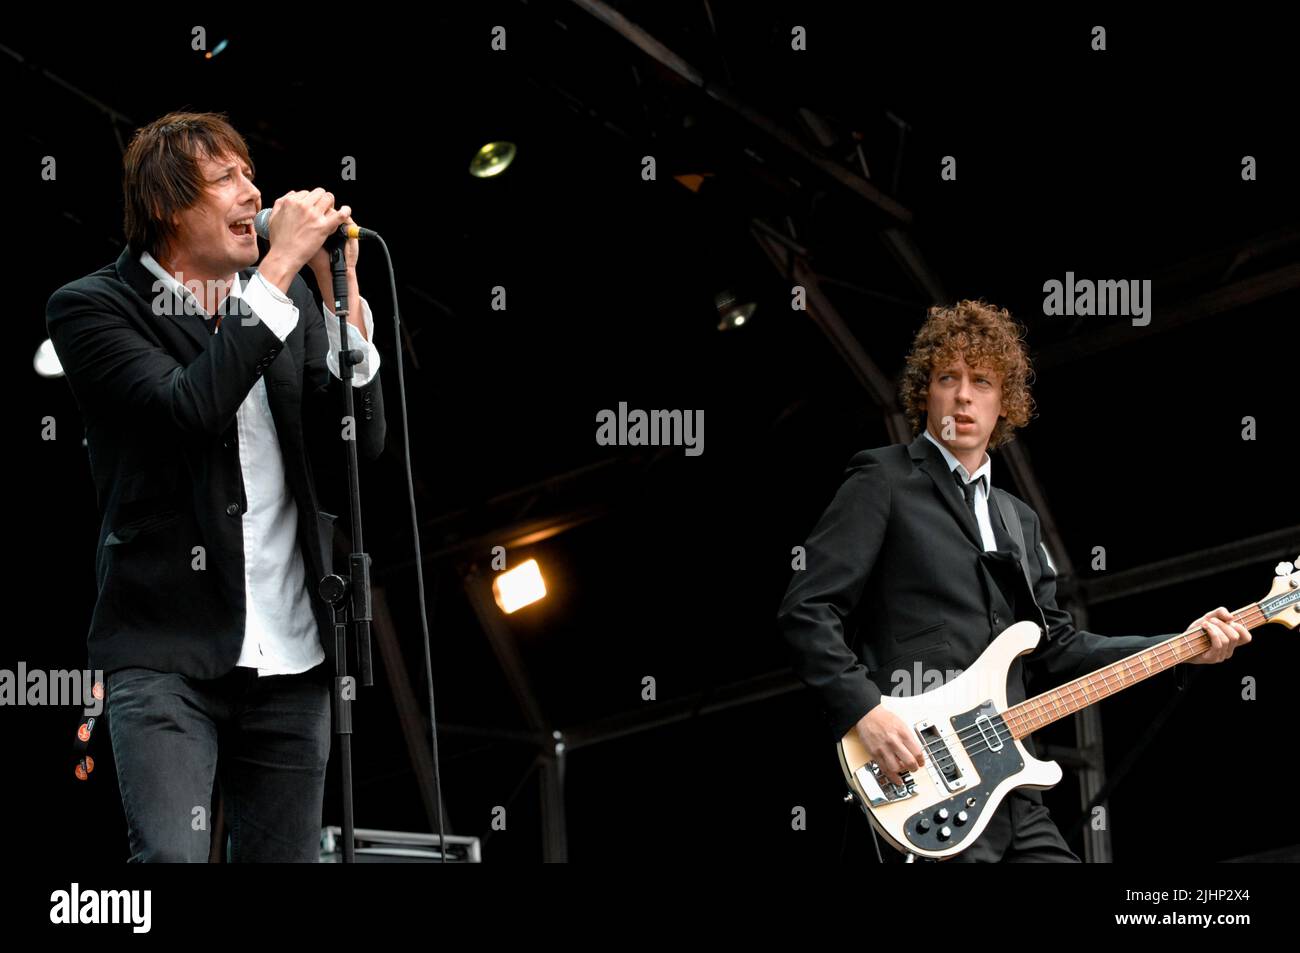 Johnny Cooke and Duncan Timms - Dogs, V2006, Hylands Park, Chelmsford, Essex, Regno Unito - 20 agosto 2006 Foto Stock